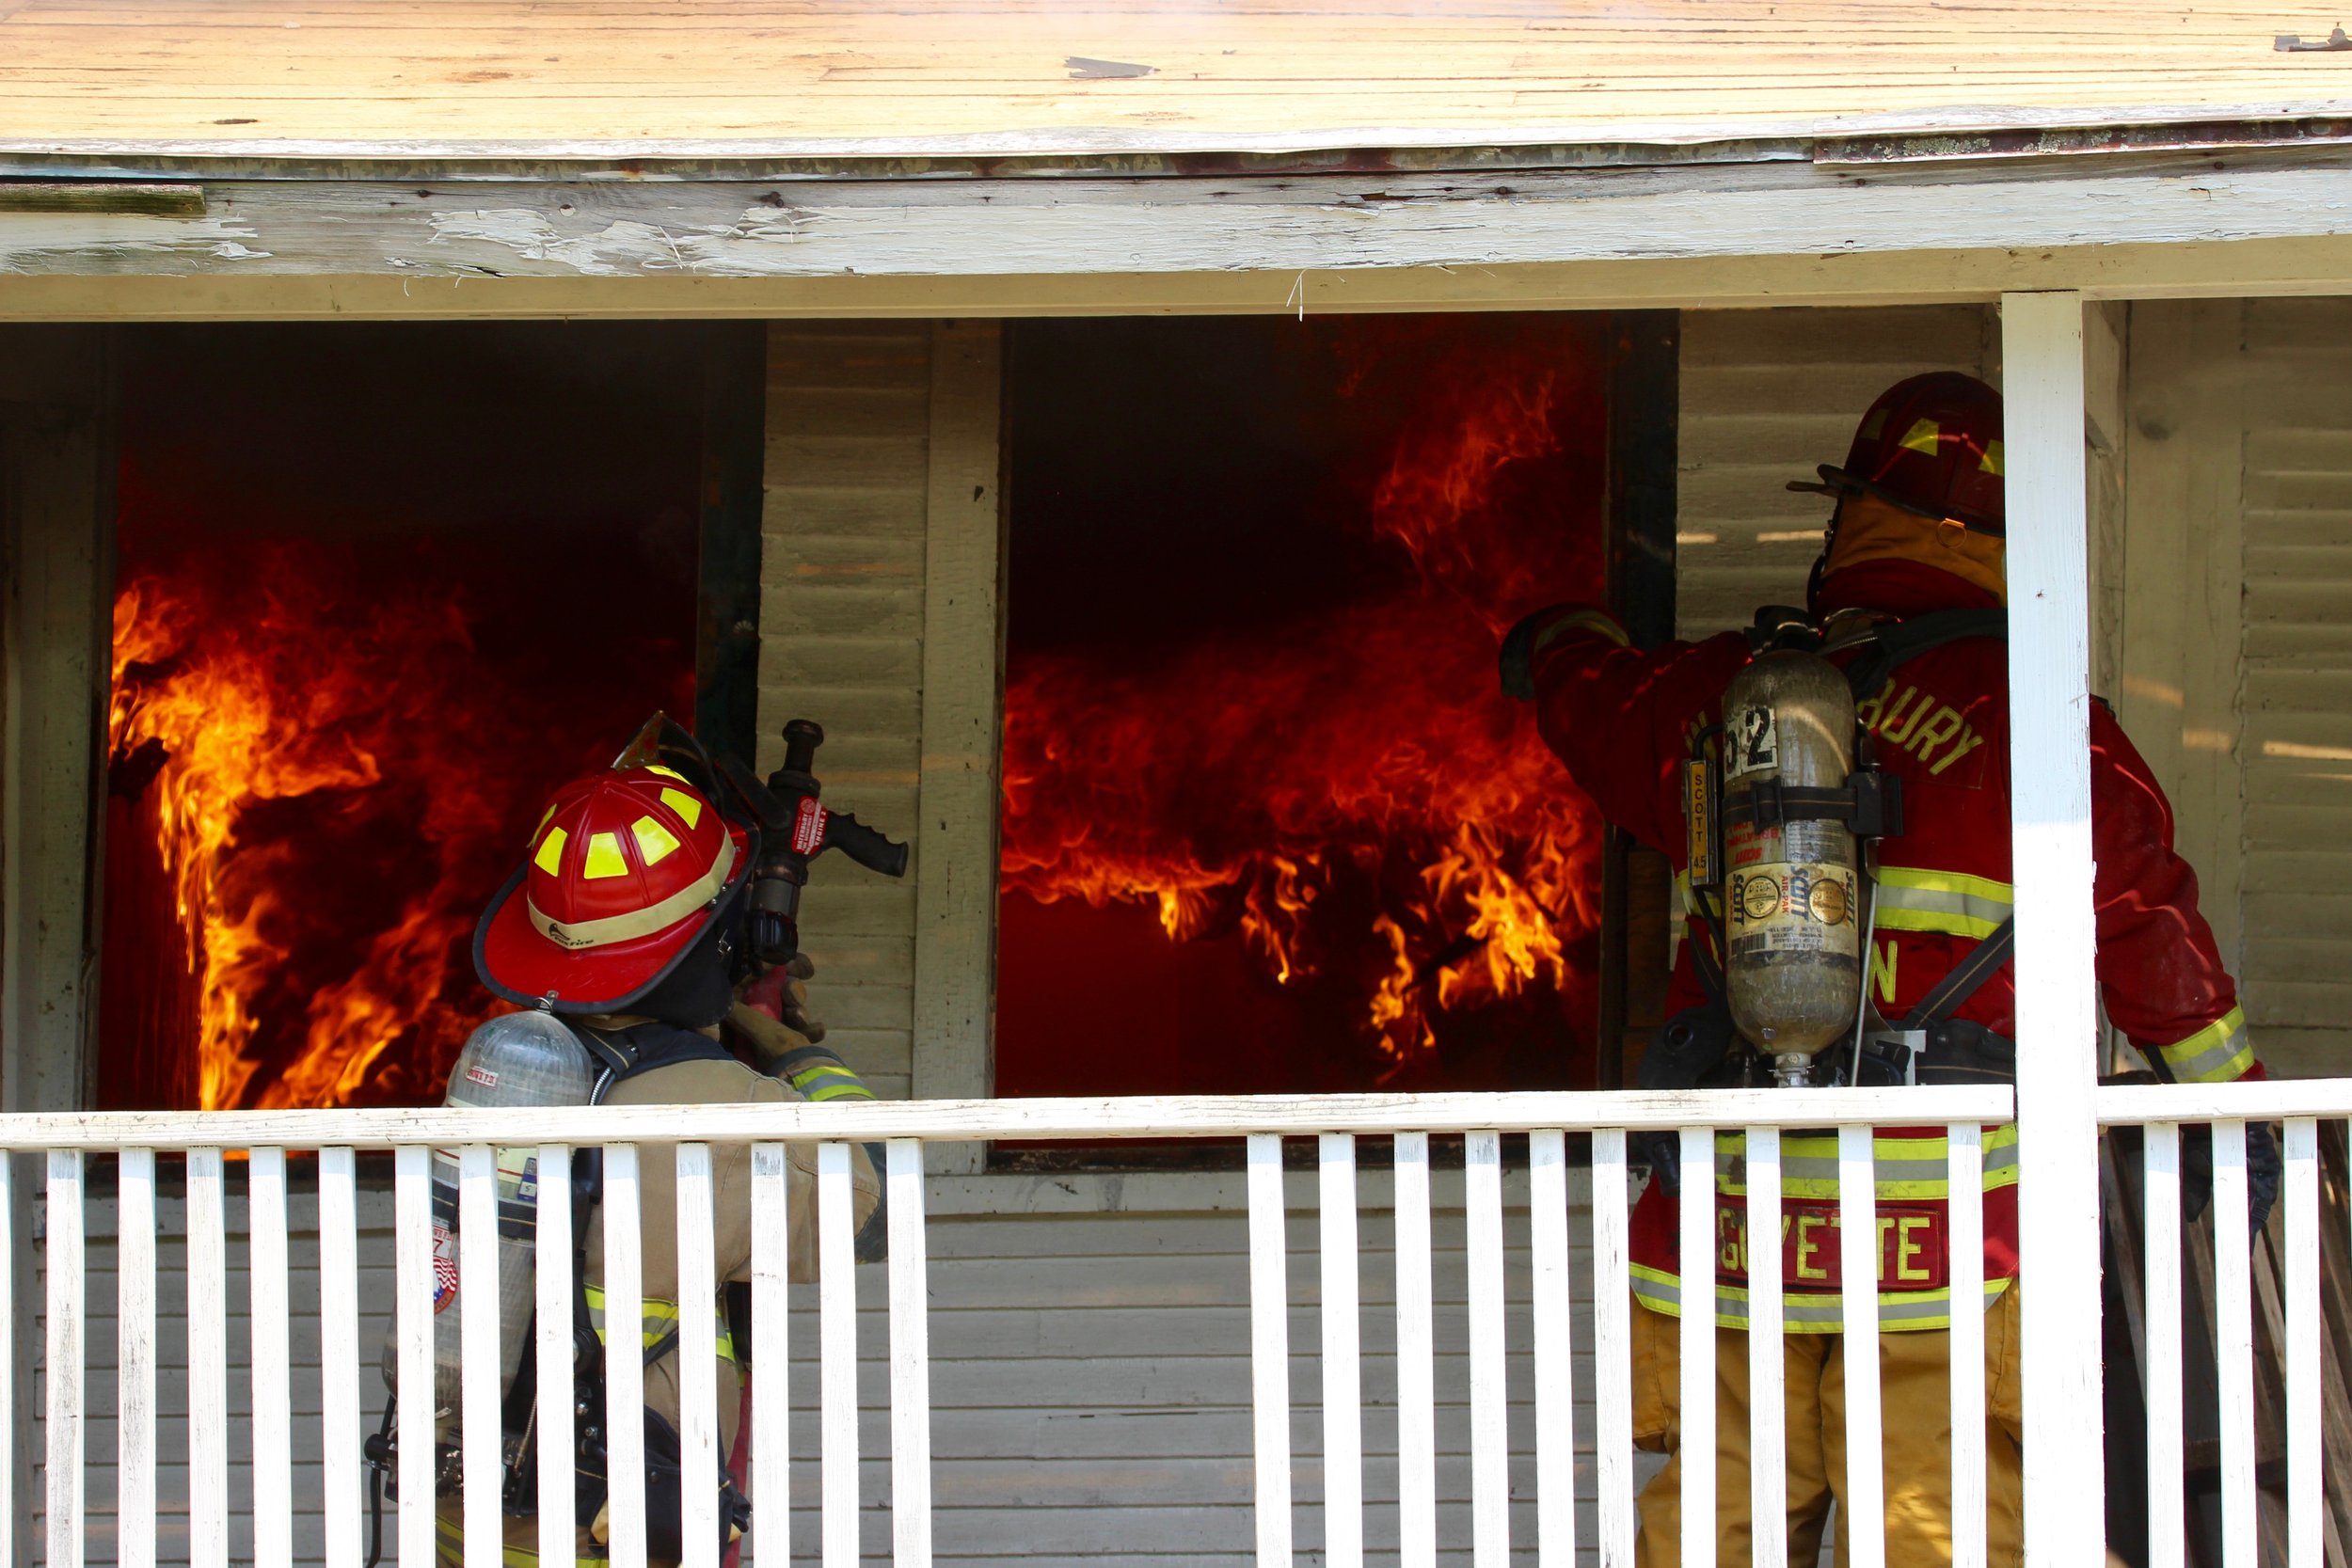   A Stowe firefighter and Captain Kyle Guyette on the porch. Photo by René Morse  